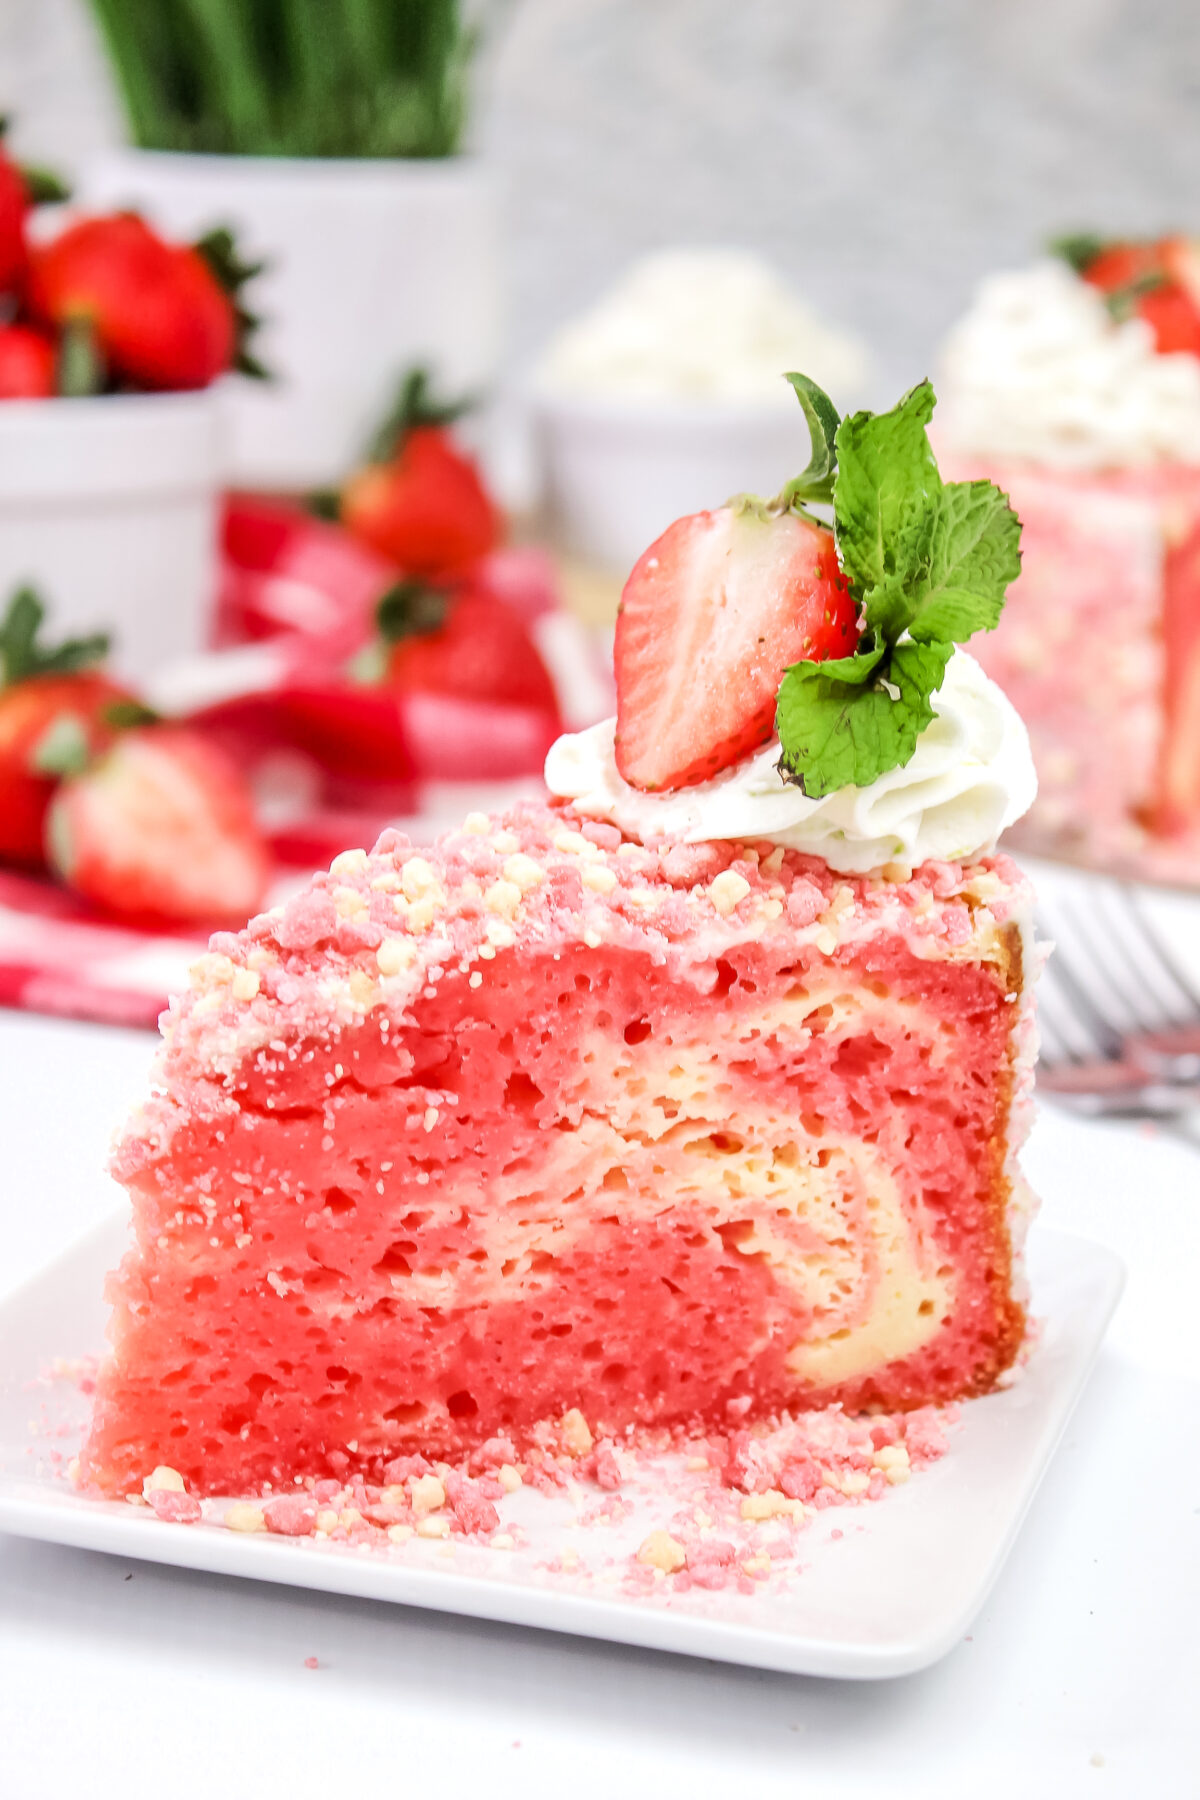 Looking for an amazing cake recipe? This strawberry crunch cheesecake cake is easy to make and will wow your taste buds!